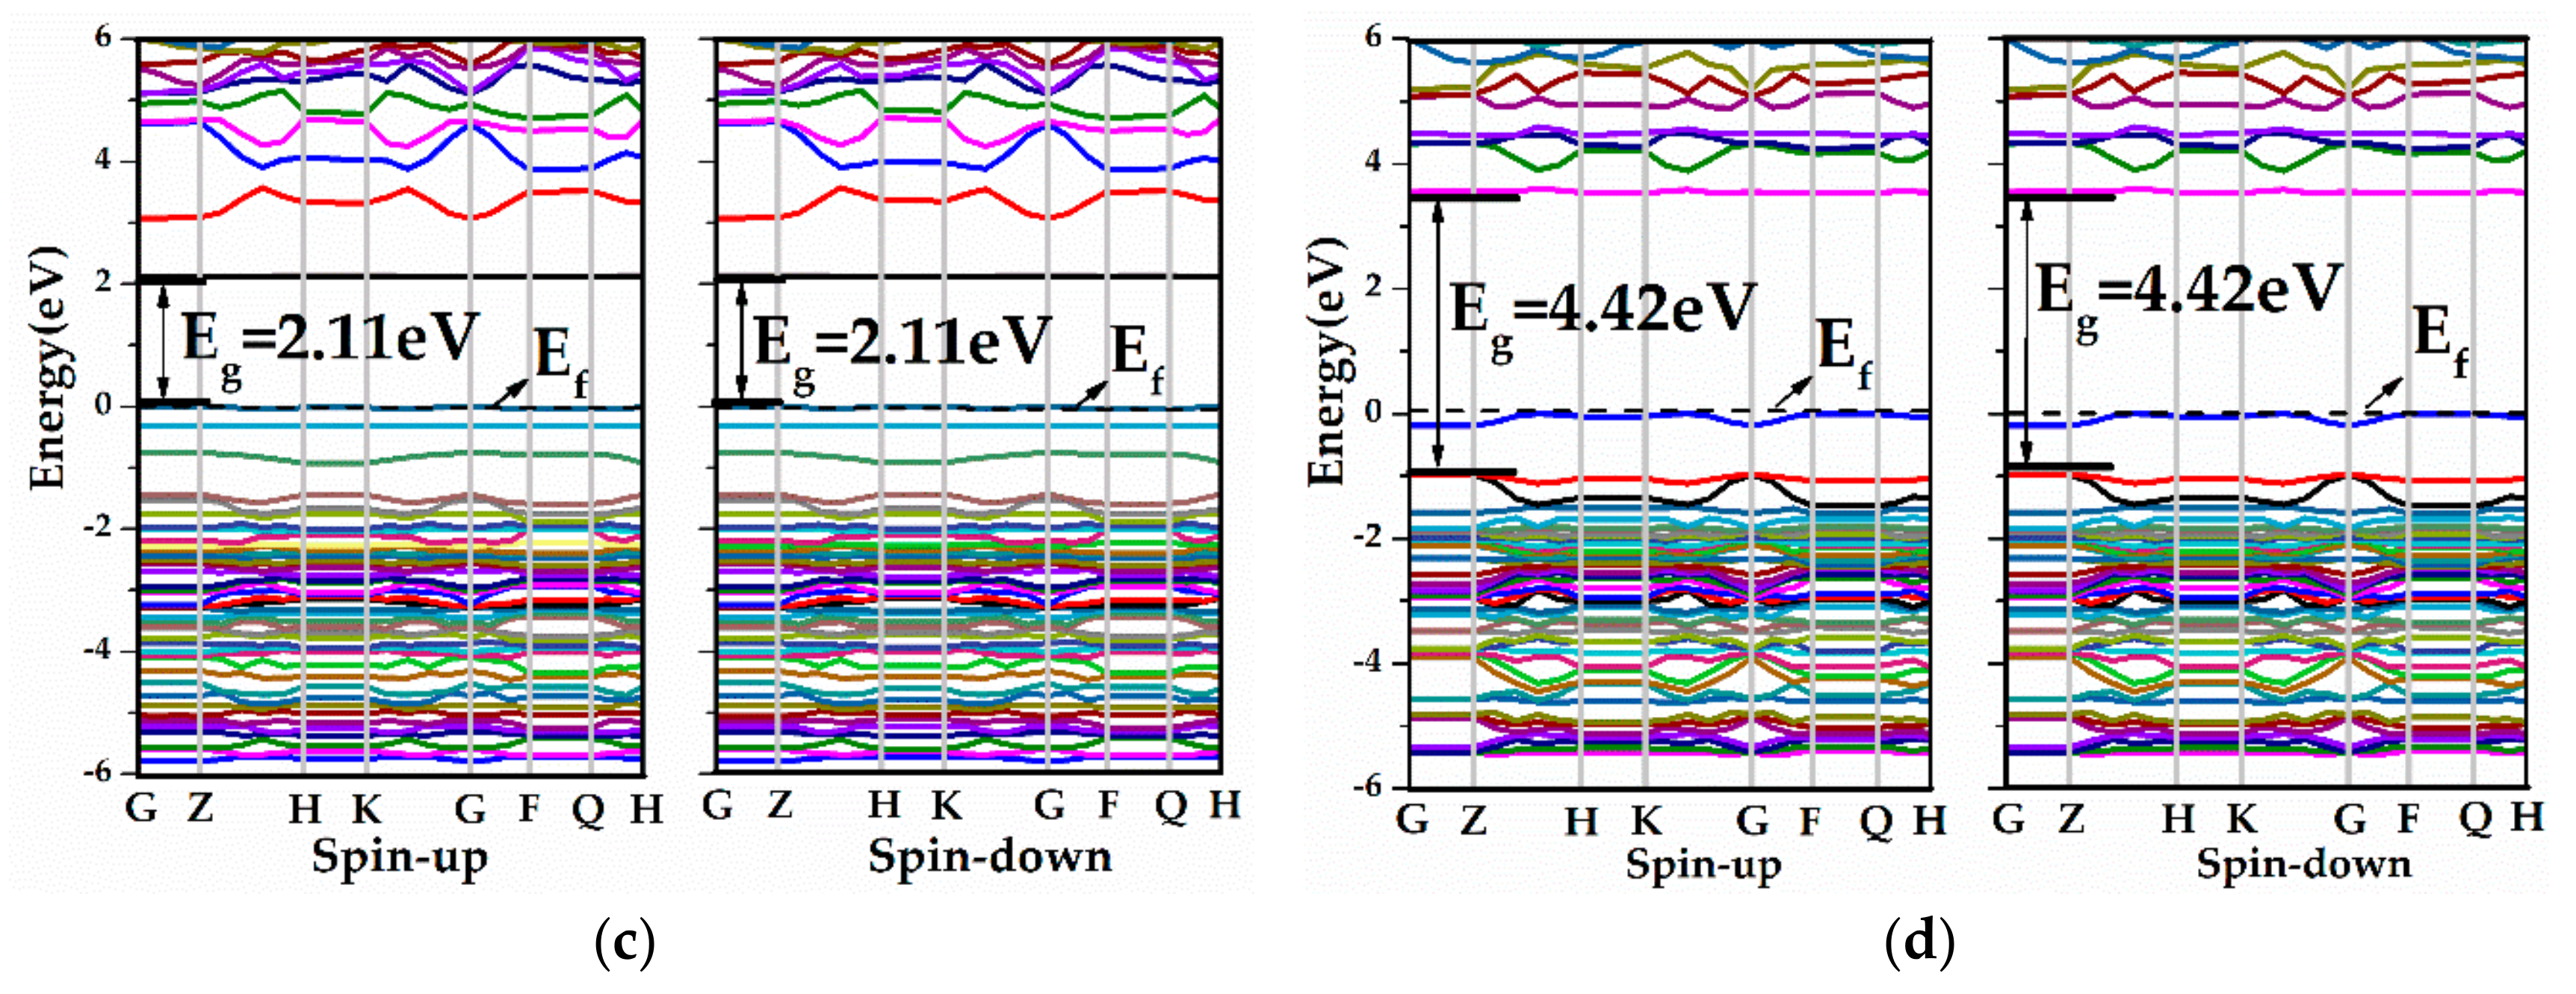 Materials Free Full Text First Principles Calculations Of The Electronic Structure And Optical Properties Of Yttrium Doped Zno Monolayer With Vacancy Html